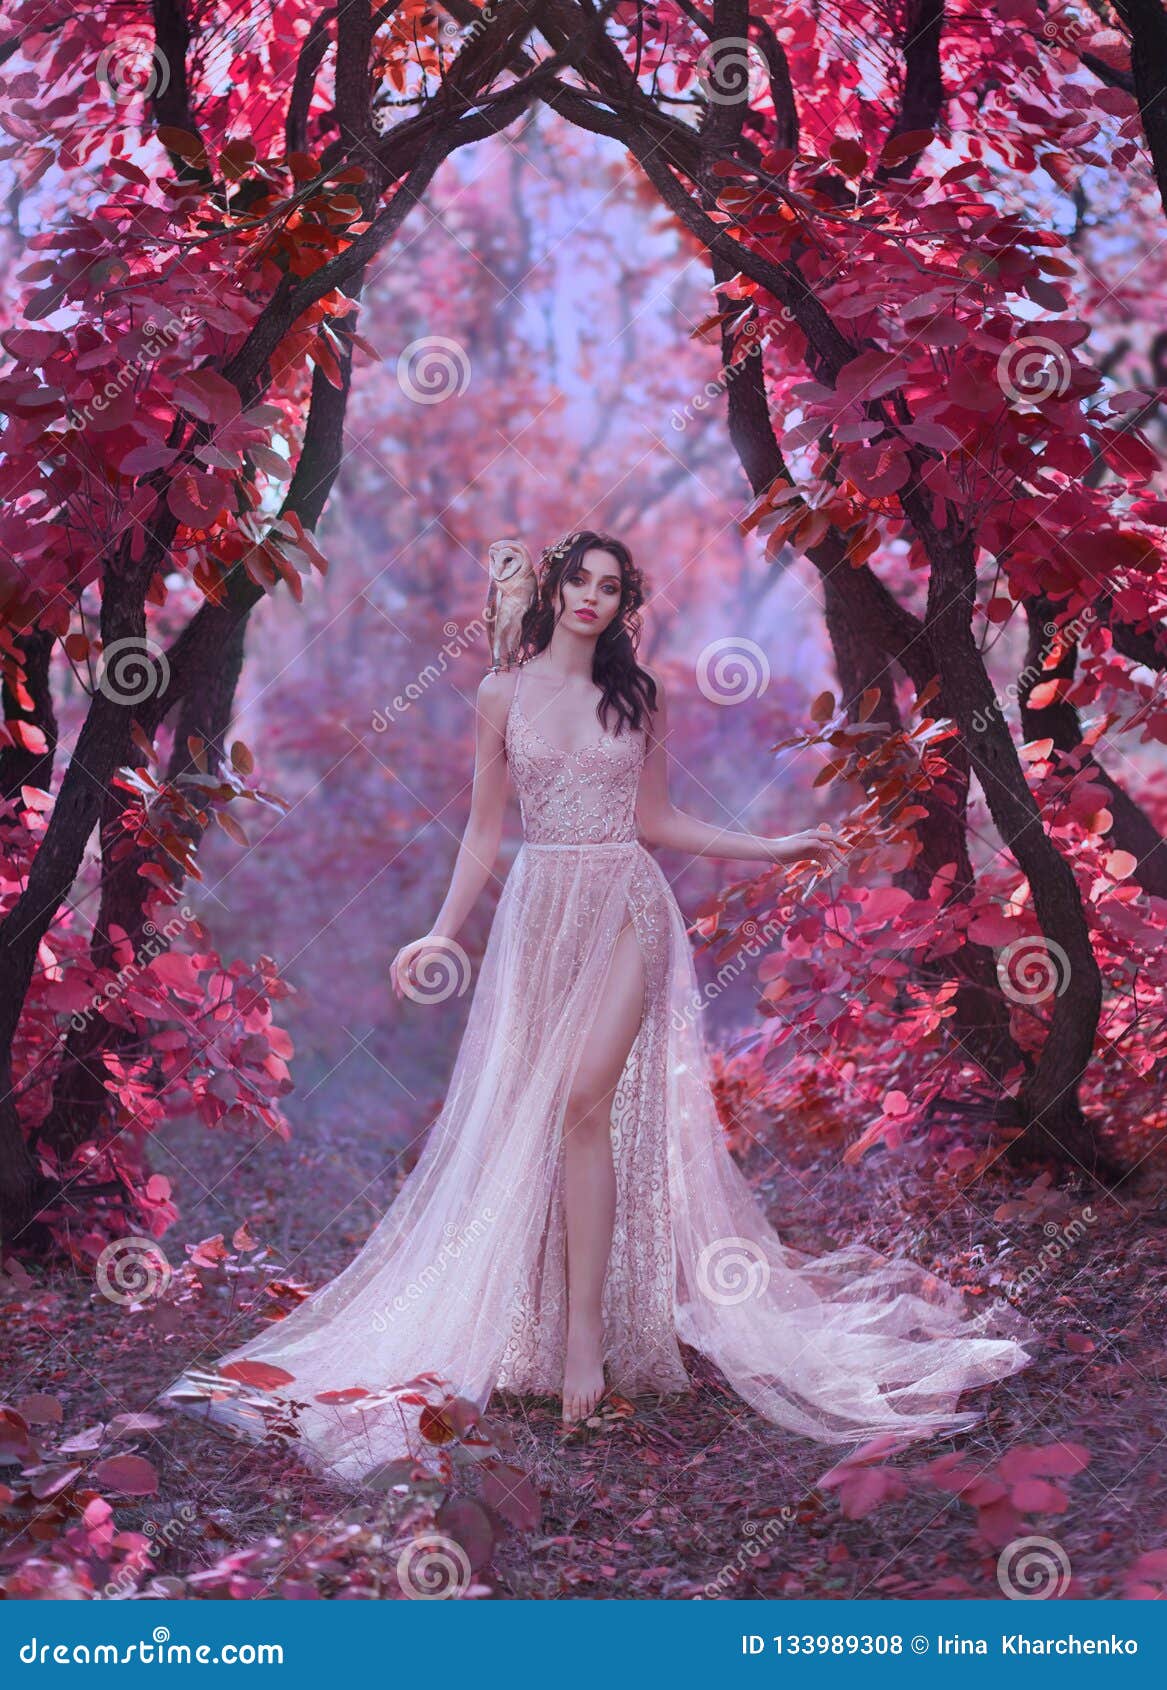 mysterious attractive lady in a long light luxury dress in a magical pink forest, gate to the fairy-tale world, cute